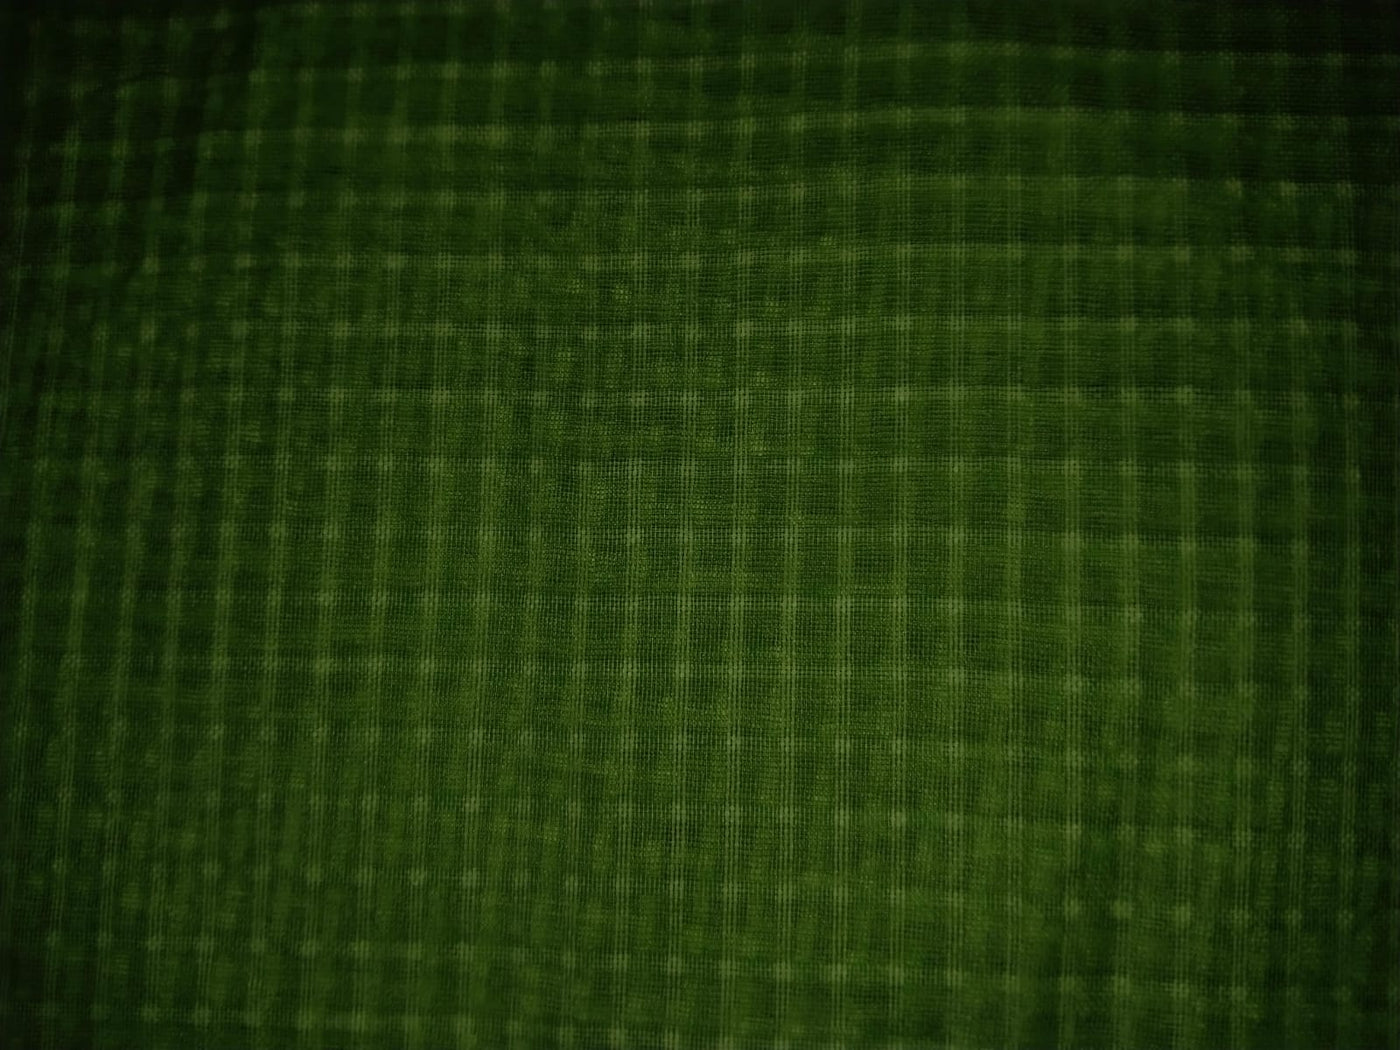 Cotton Organdy Micro Check stiff finish-4 mm x 4 mm size 44'' wide available in [GREEN 0.85 YARDS IVORY 1 YARD ONLY PEACH 1.40 YARDS MAJENTA BY THE YARD][15570-15573]